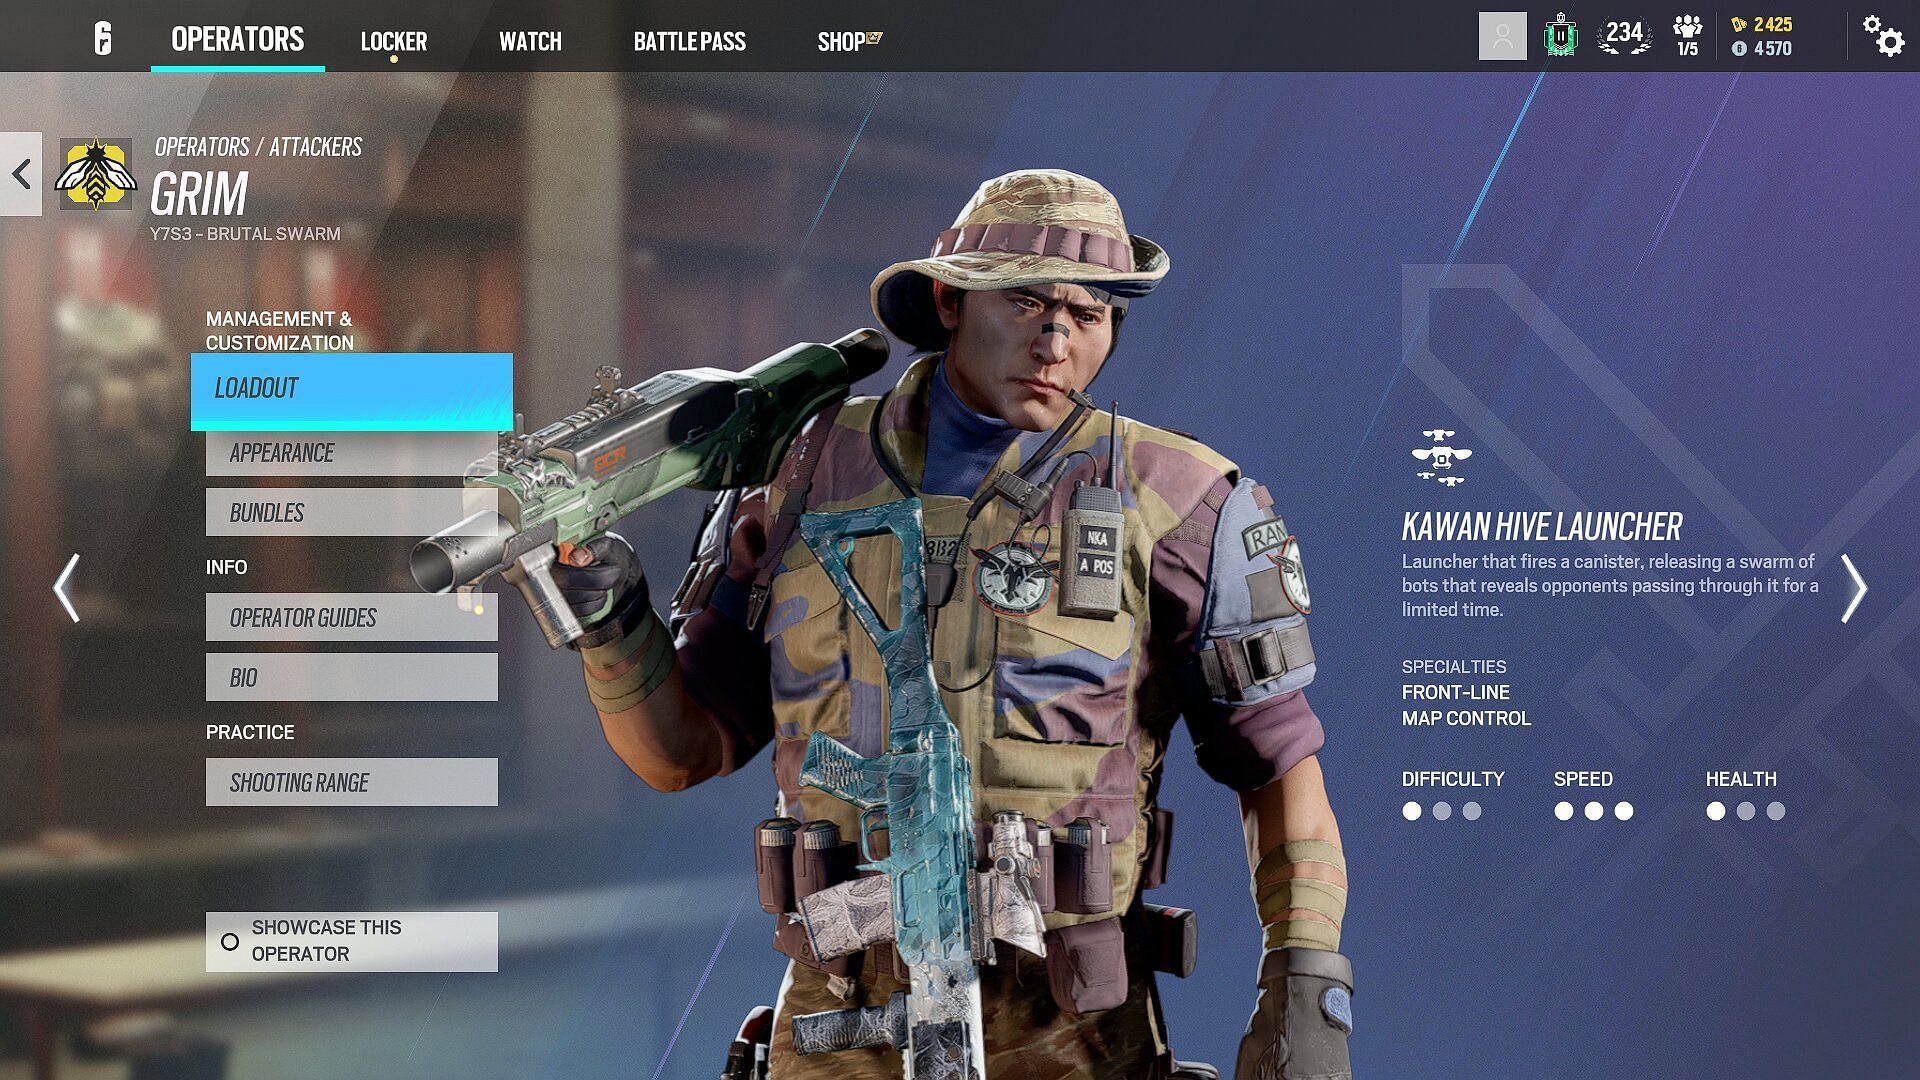 Grim&#039;s whole kit allows him to stand out as one of the best support operators for Skyscraper (Image via Ubisoft)